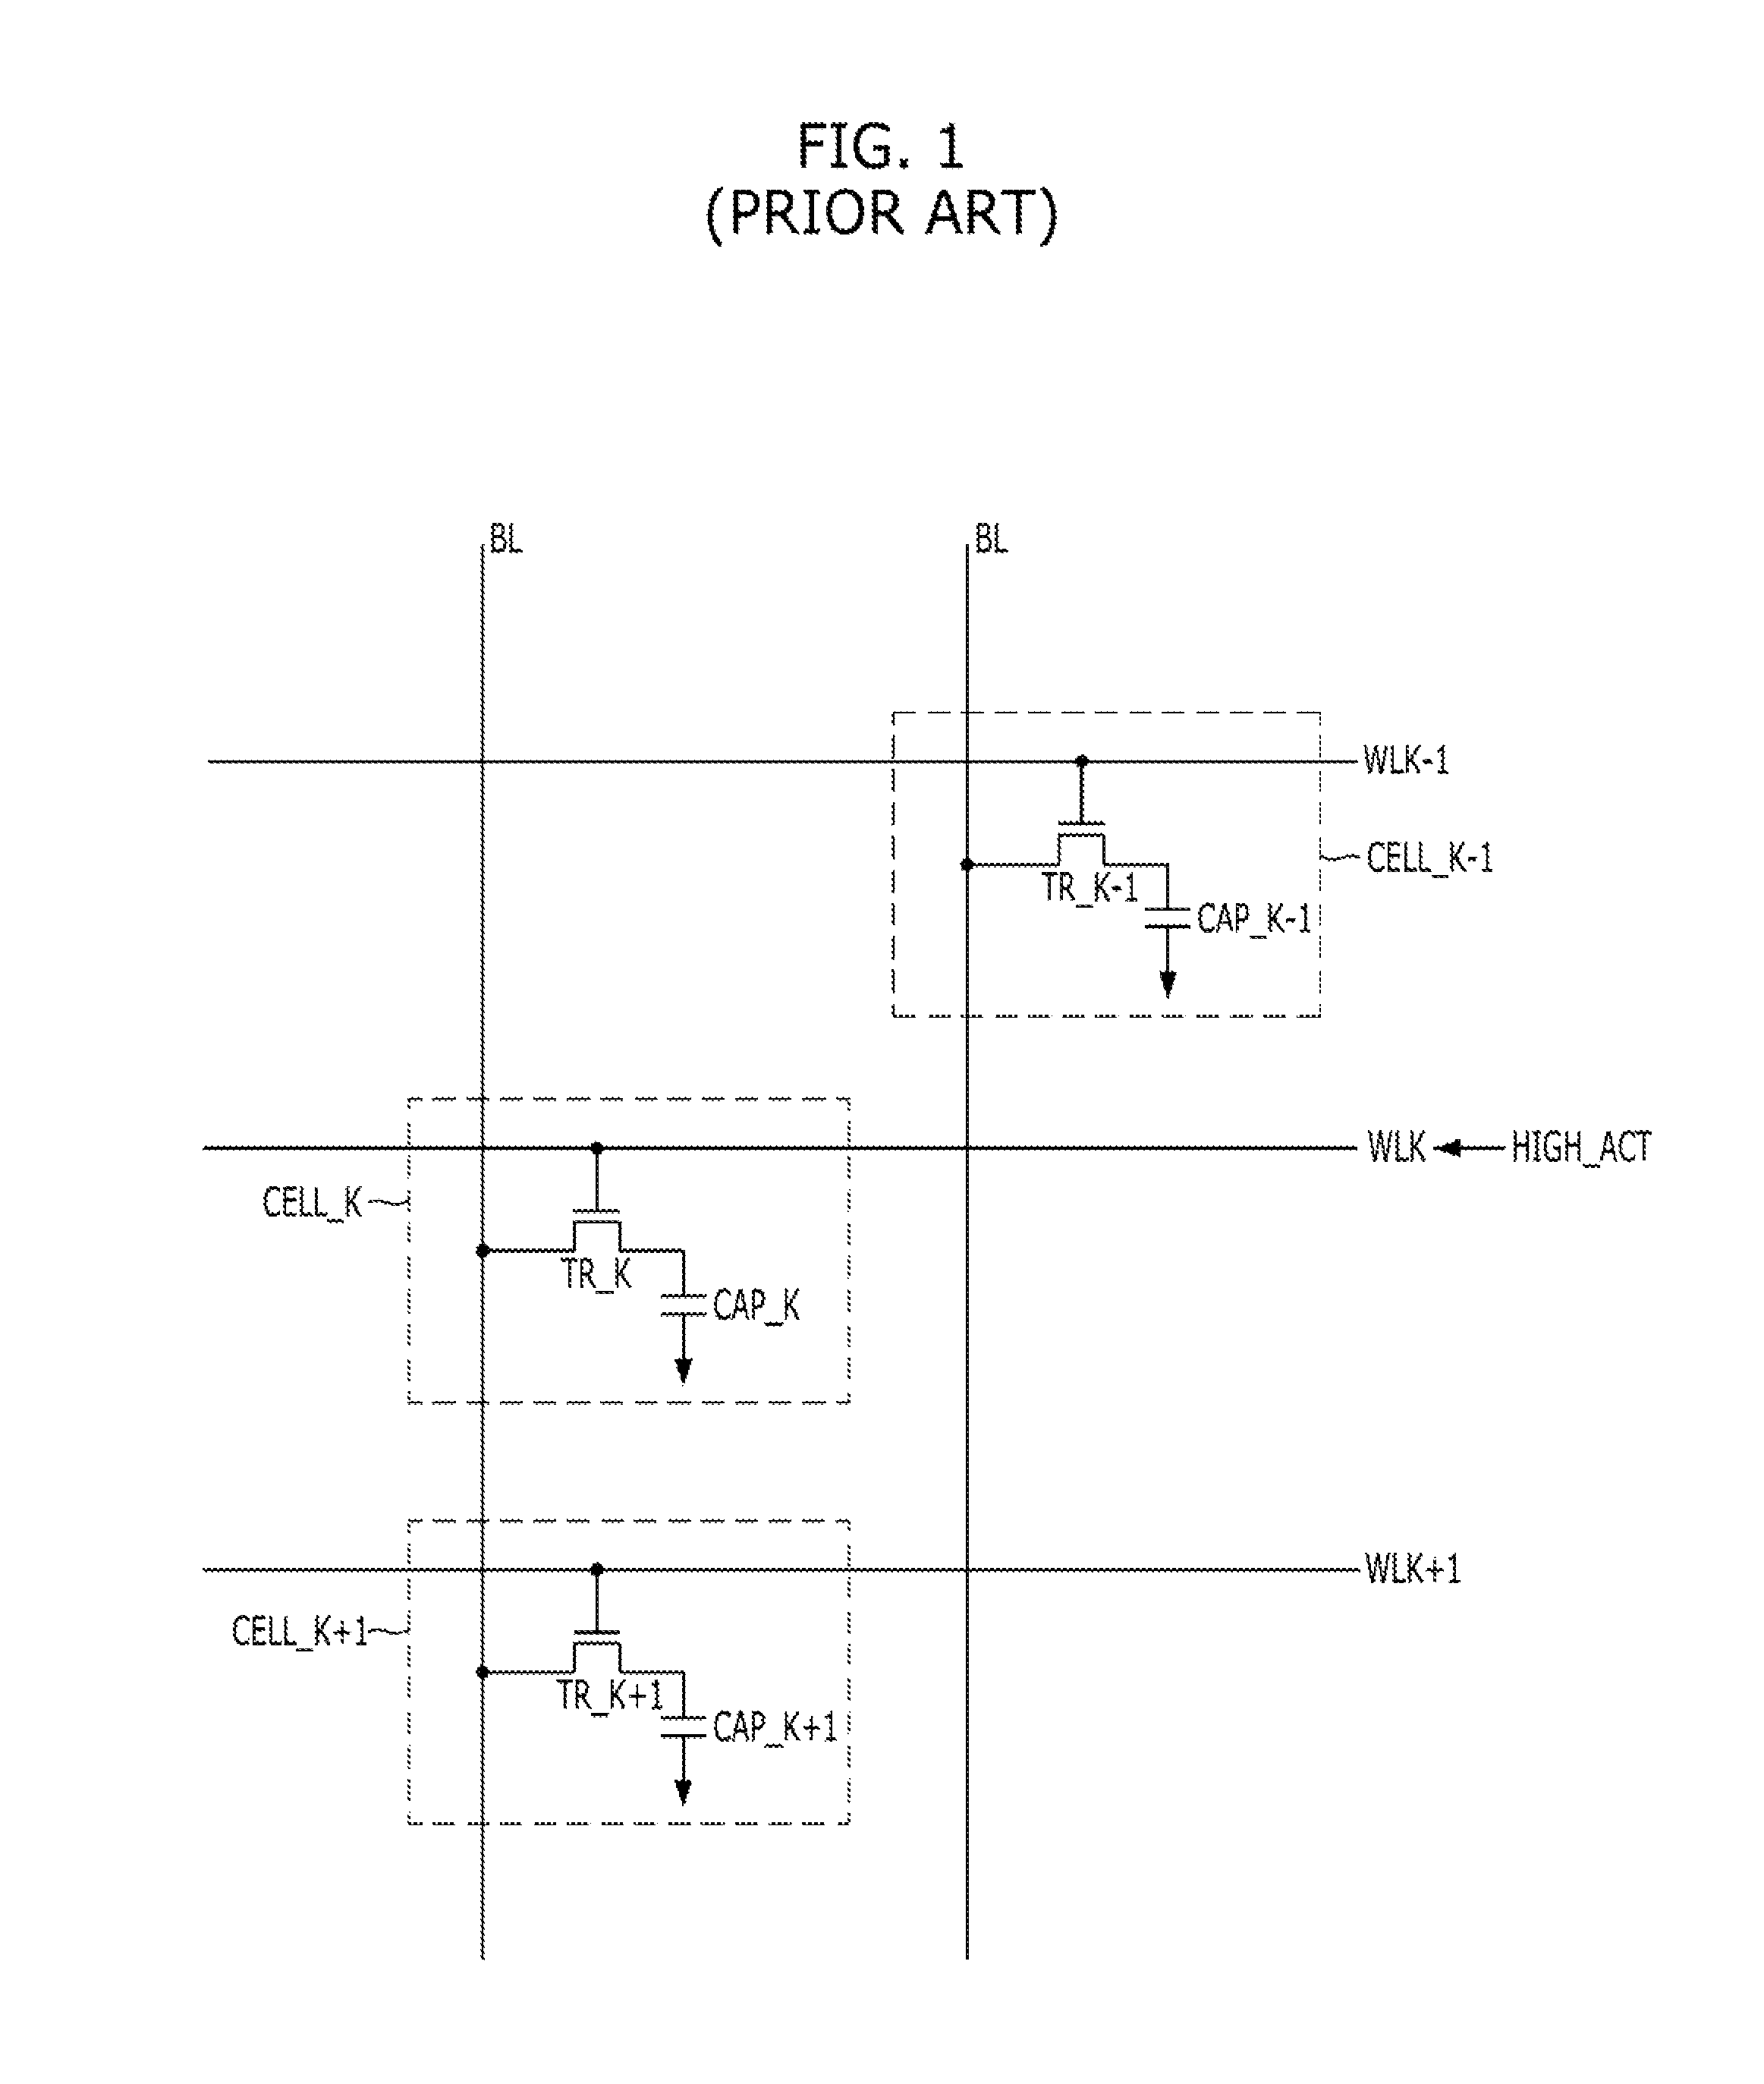 Memory and memory system for periodic targeted refresh